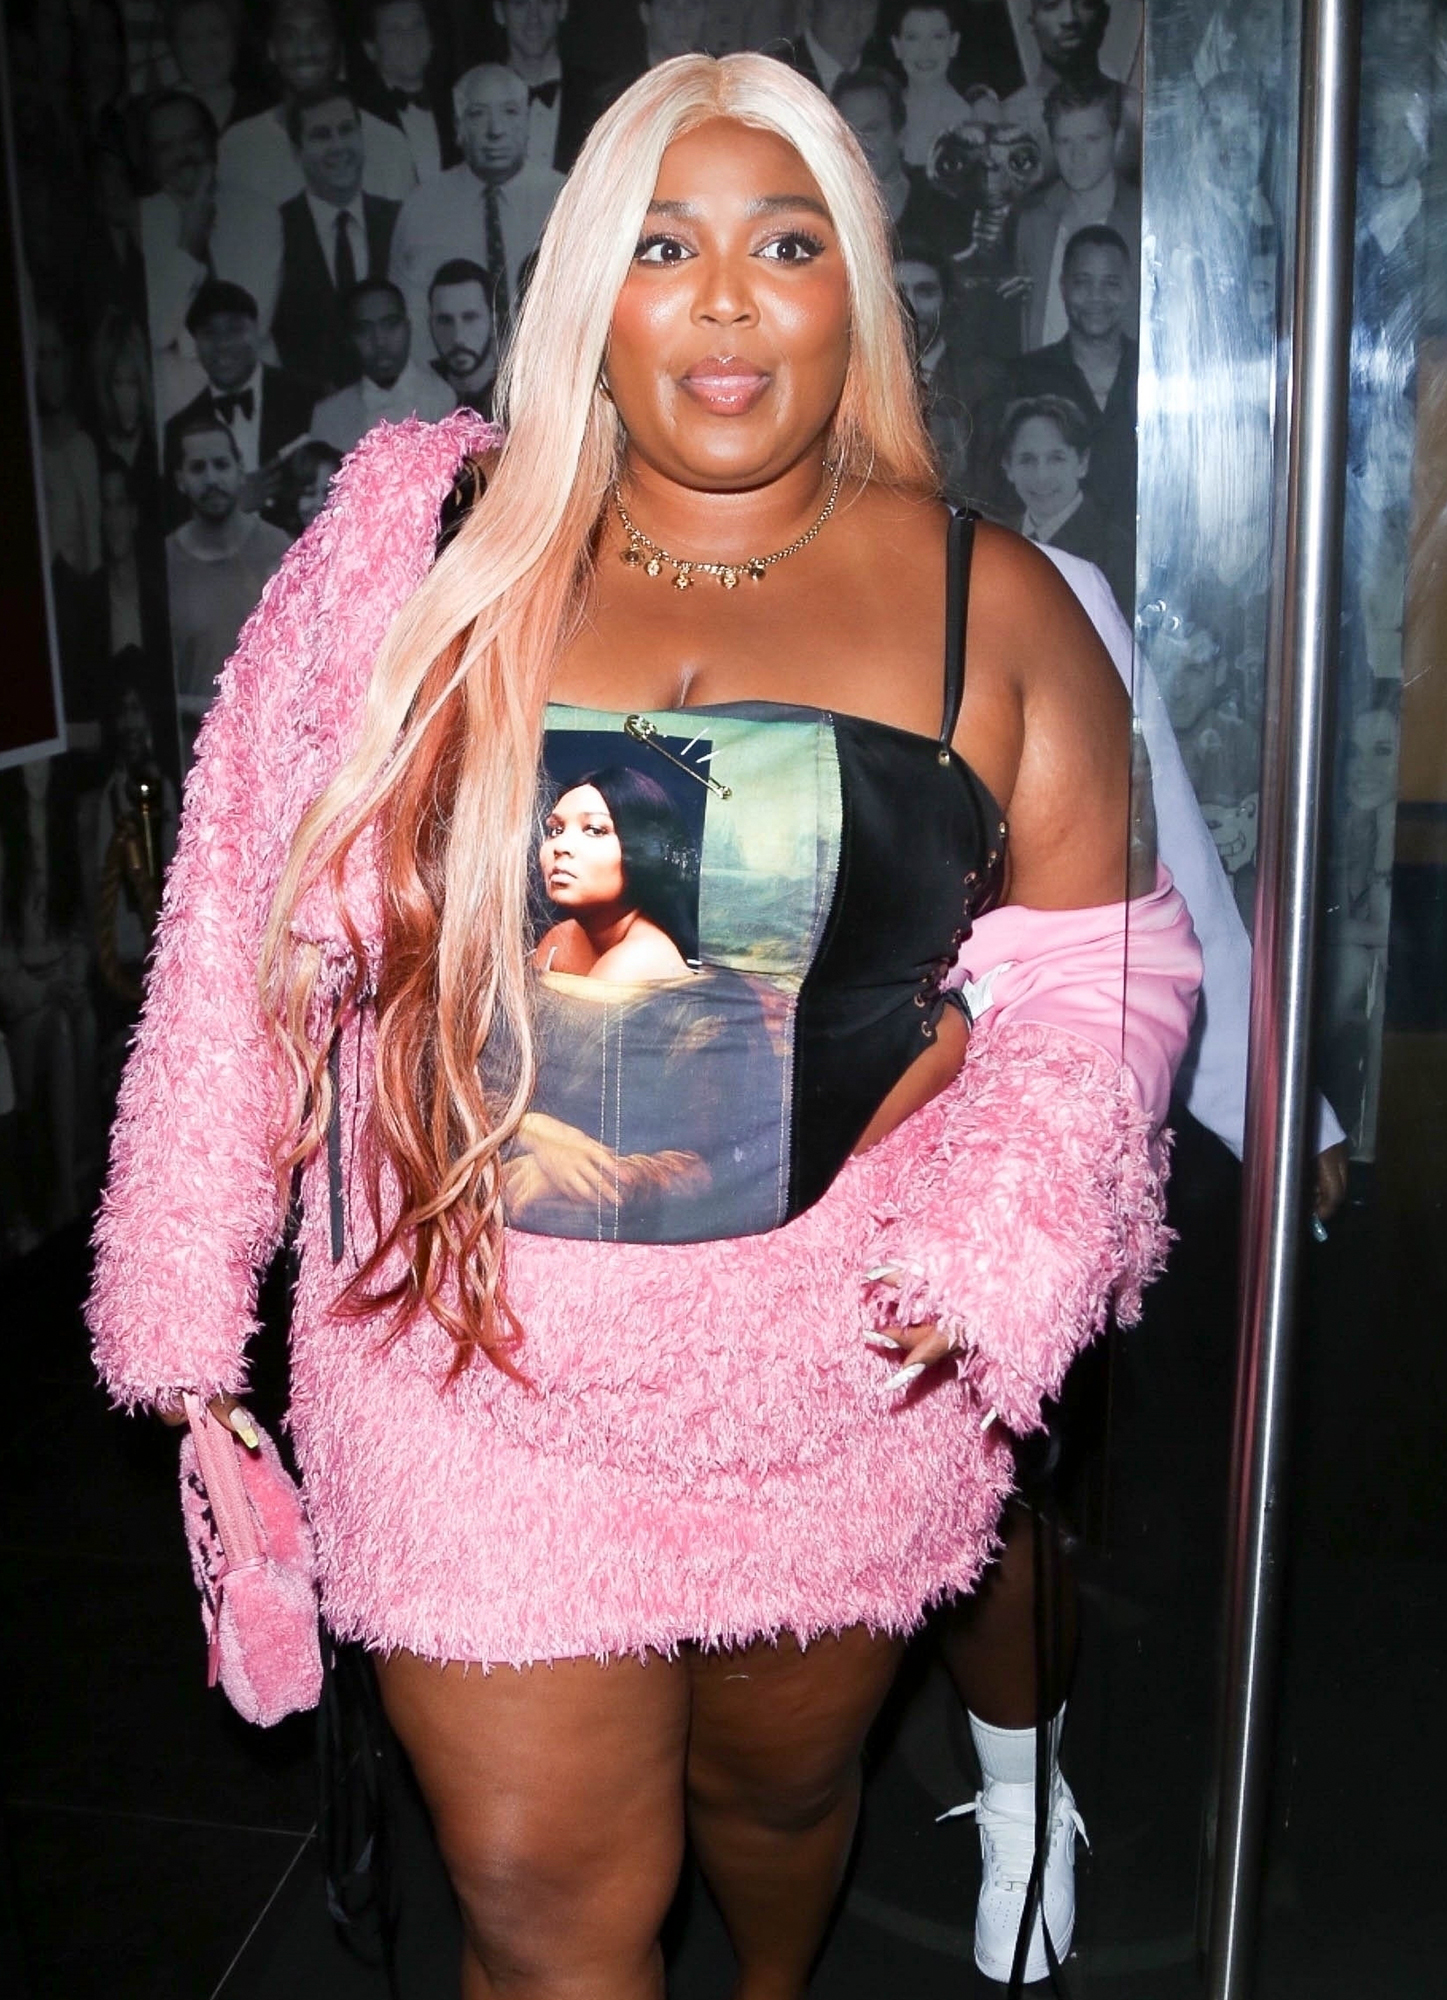 Lizzo Says She 'Had to Own' Being Plus-Sized: I 'Didn't Have the Luxury of Hiding Behind Anything'